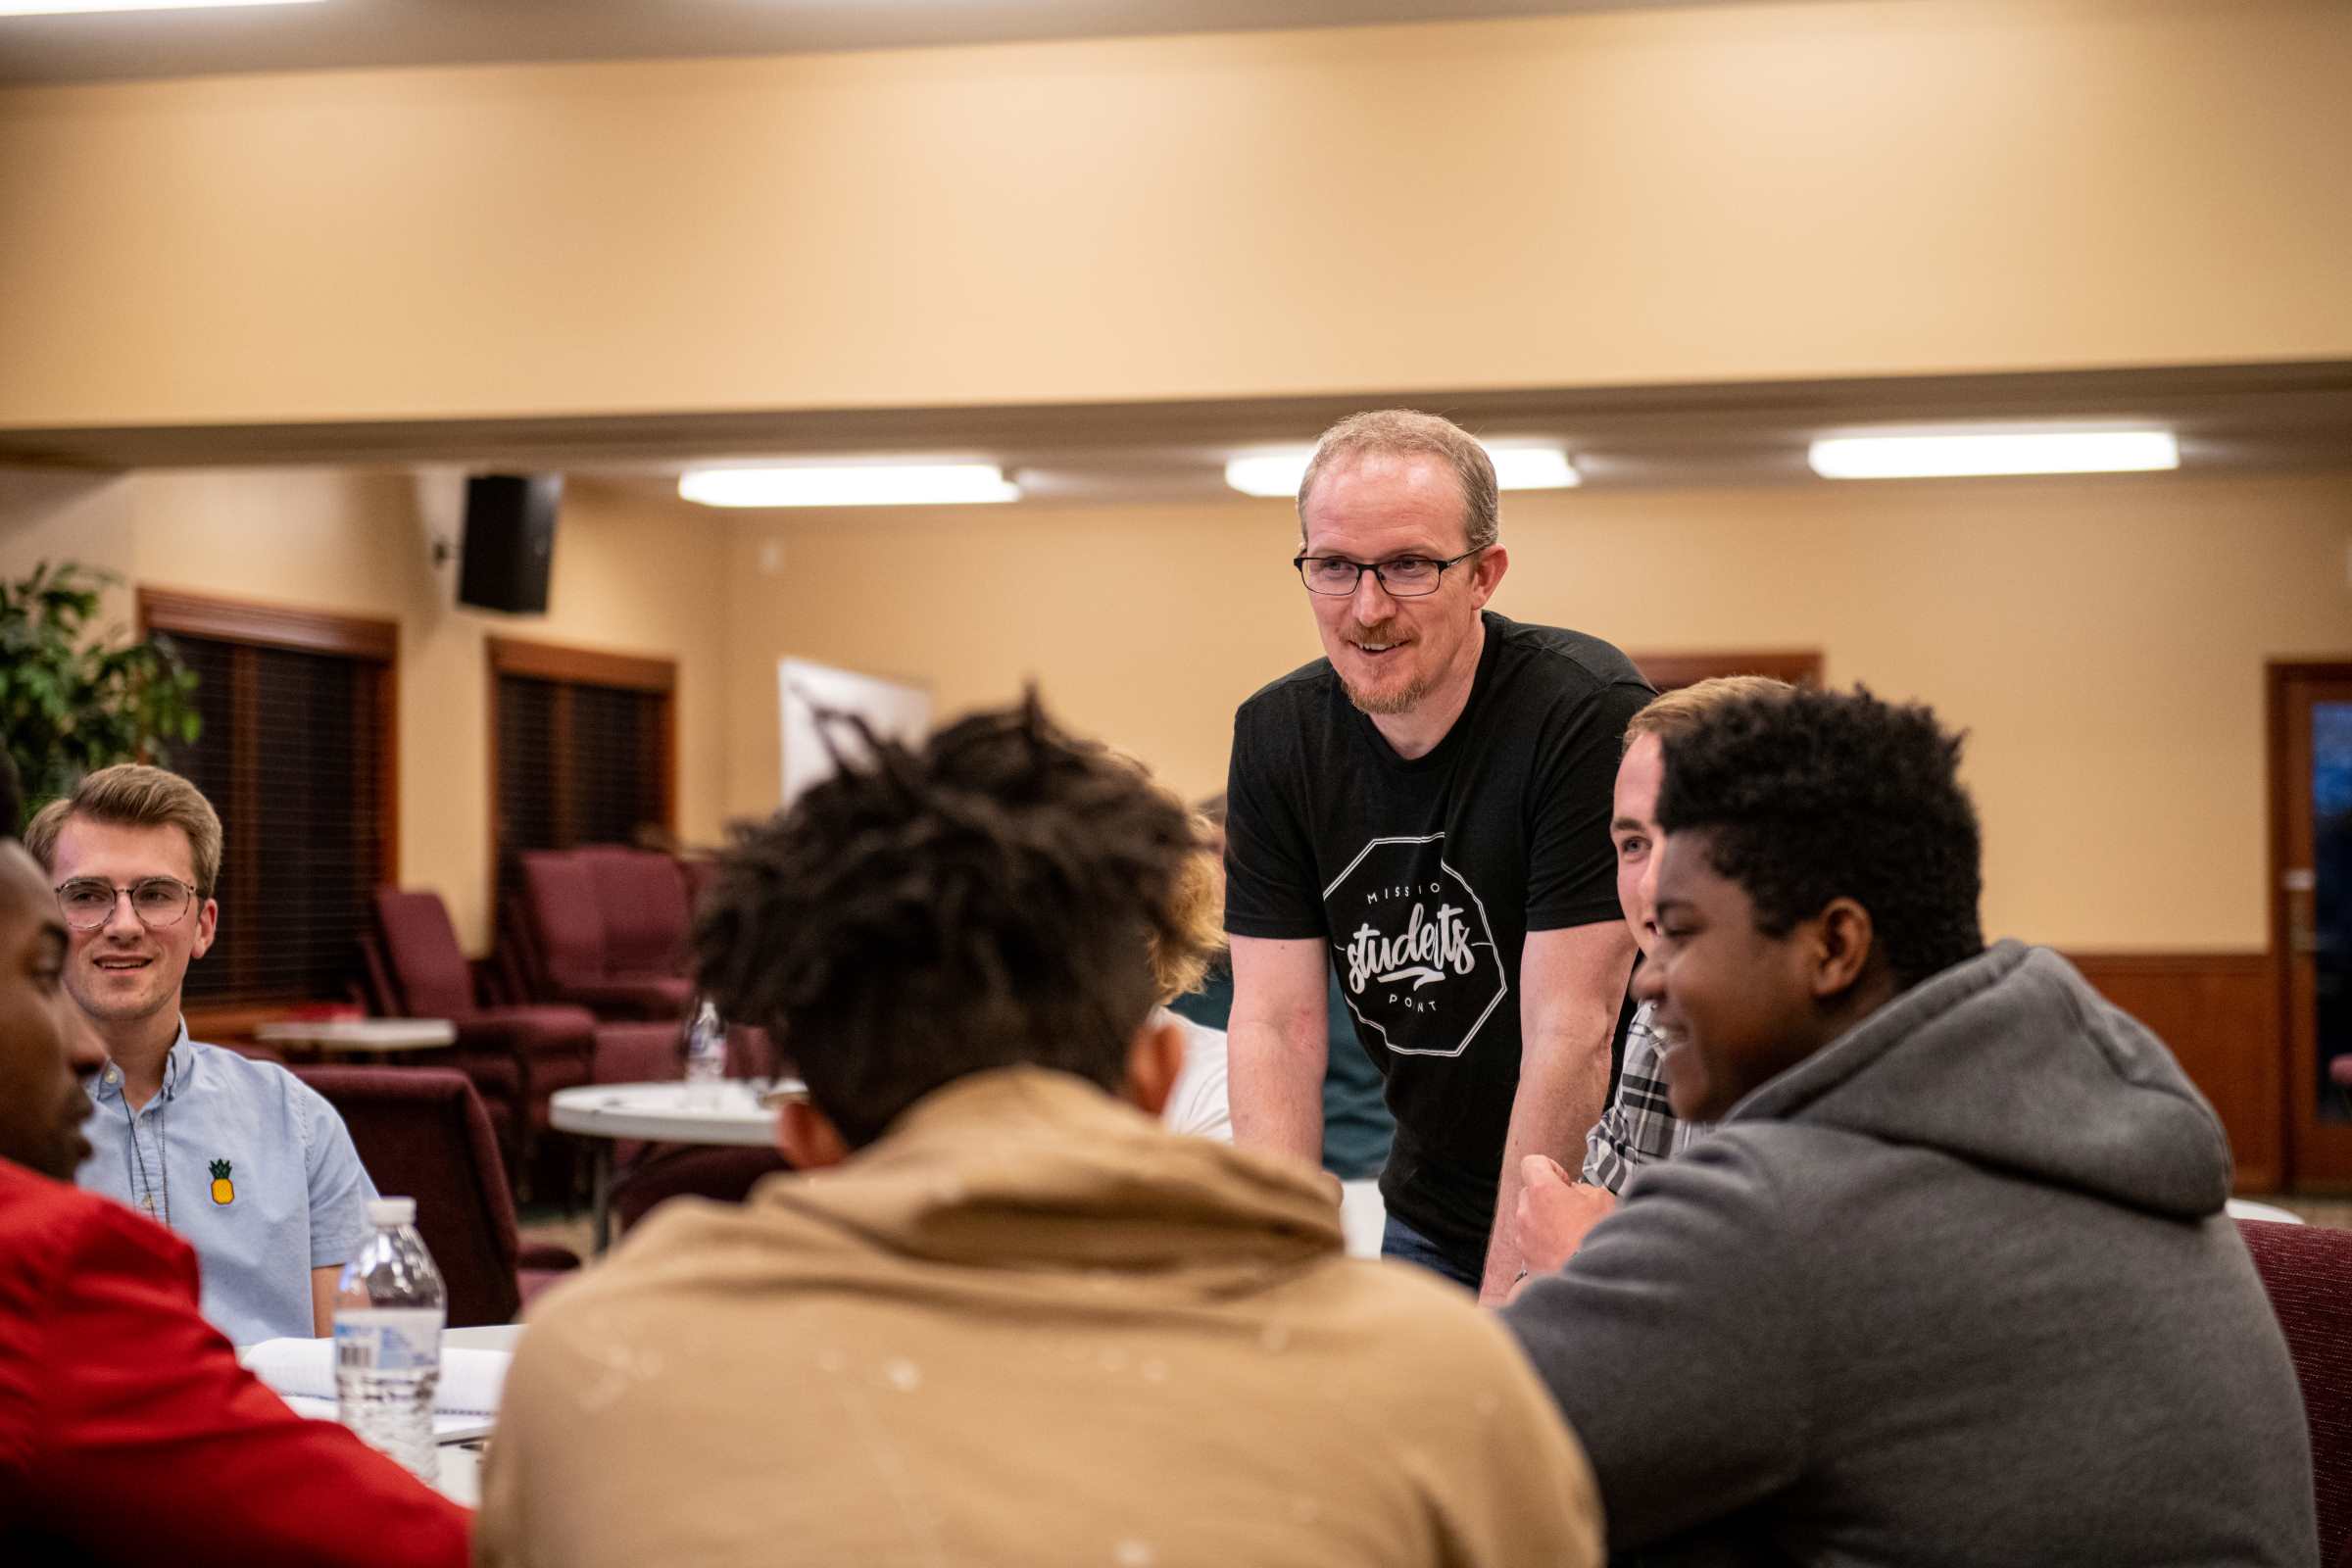 Looking for Youth Ministry Tools? Grace Theological Seminary is equipping you with student ministry resources and degrees. Learn more about Grace.